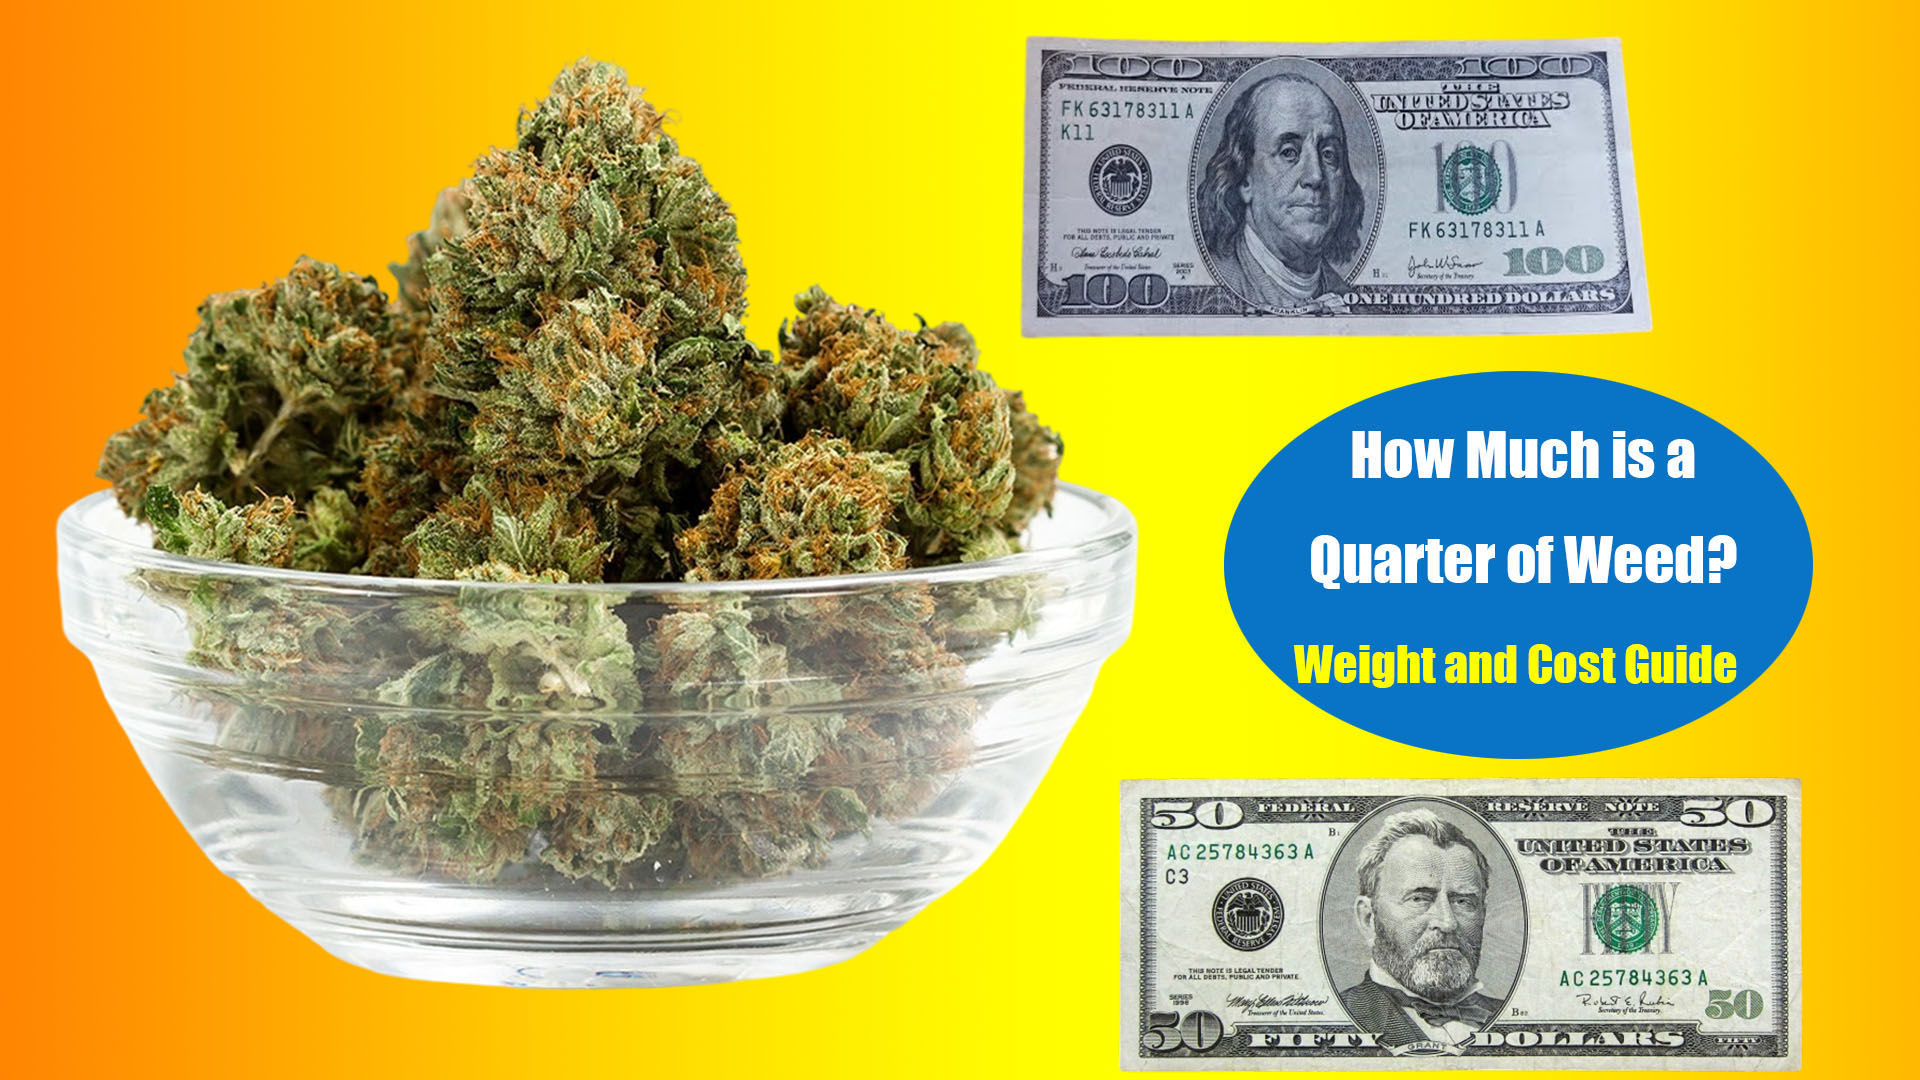 Guide on How Much is a Quarter of Weed